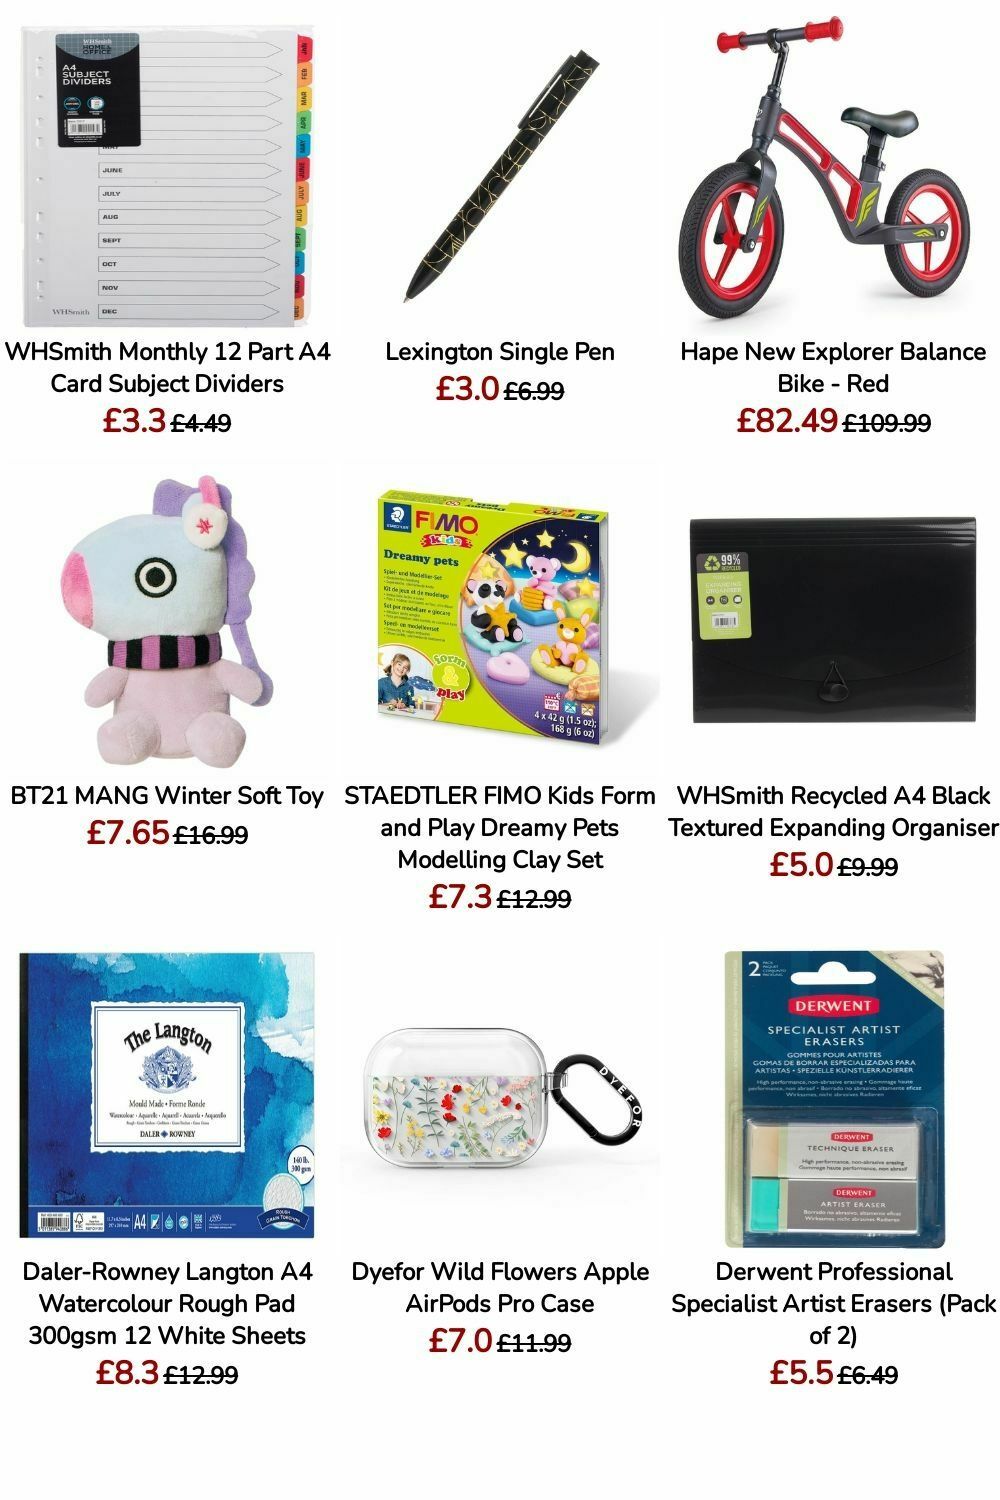 WHSmith Offers from 2 July